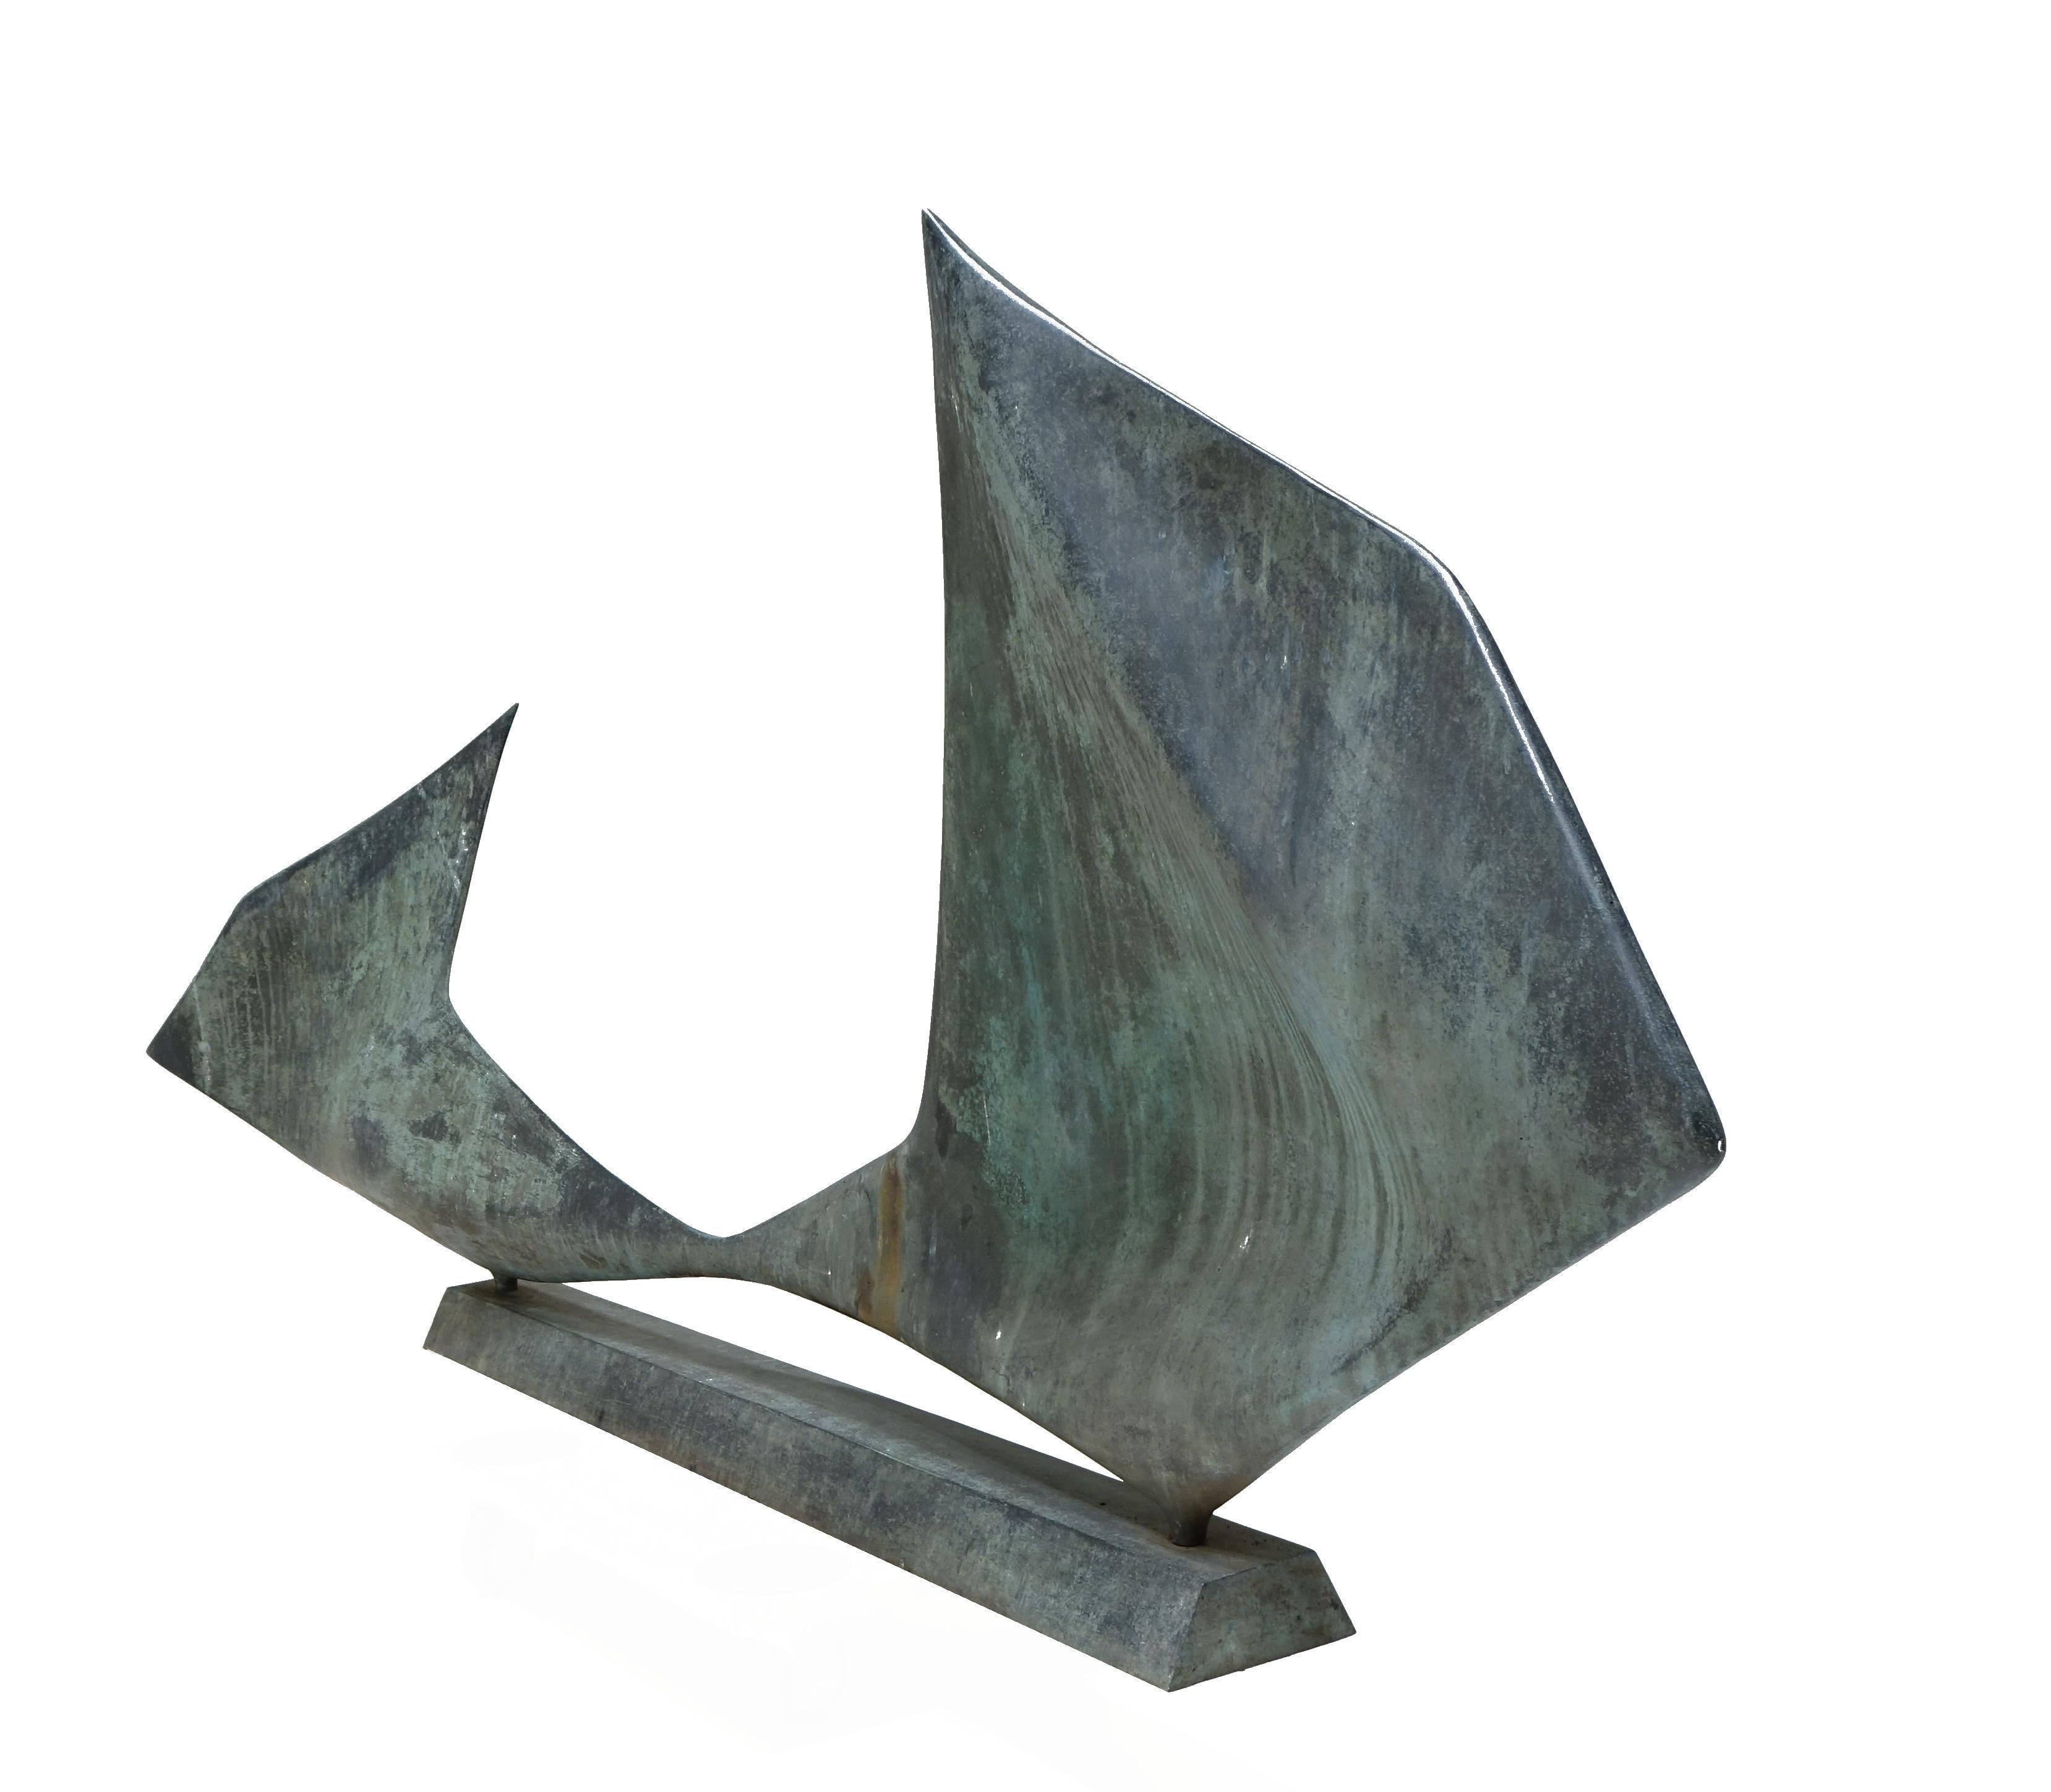 Salvatore Messina (1916-1982)
Sculpture in cast bronze
Exhibited at the Gian Ferrari staff in Milan
Then in a private collection Vicenza.
Measurements: 225 x 16 cm - height 99 cm
Salvatore Messina (1916-1982)
Sculpture in cast